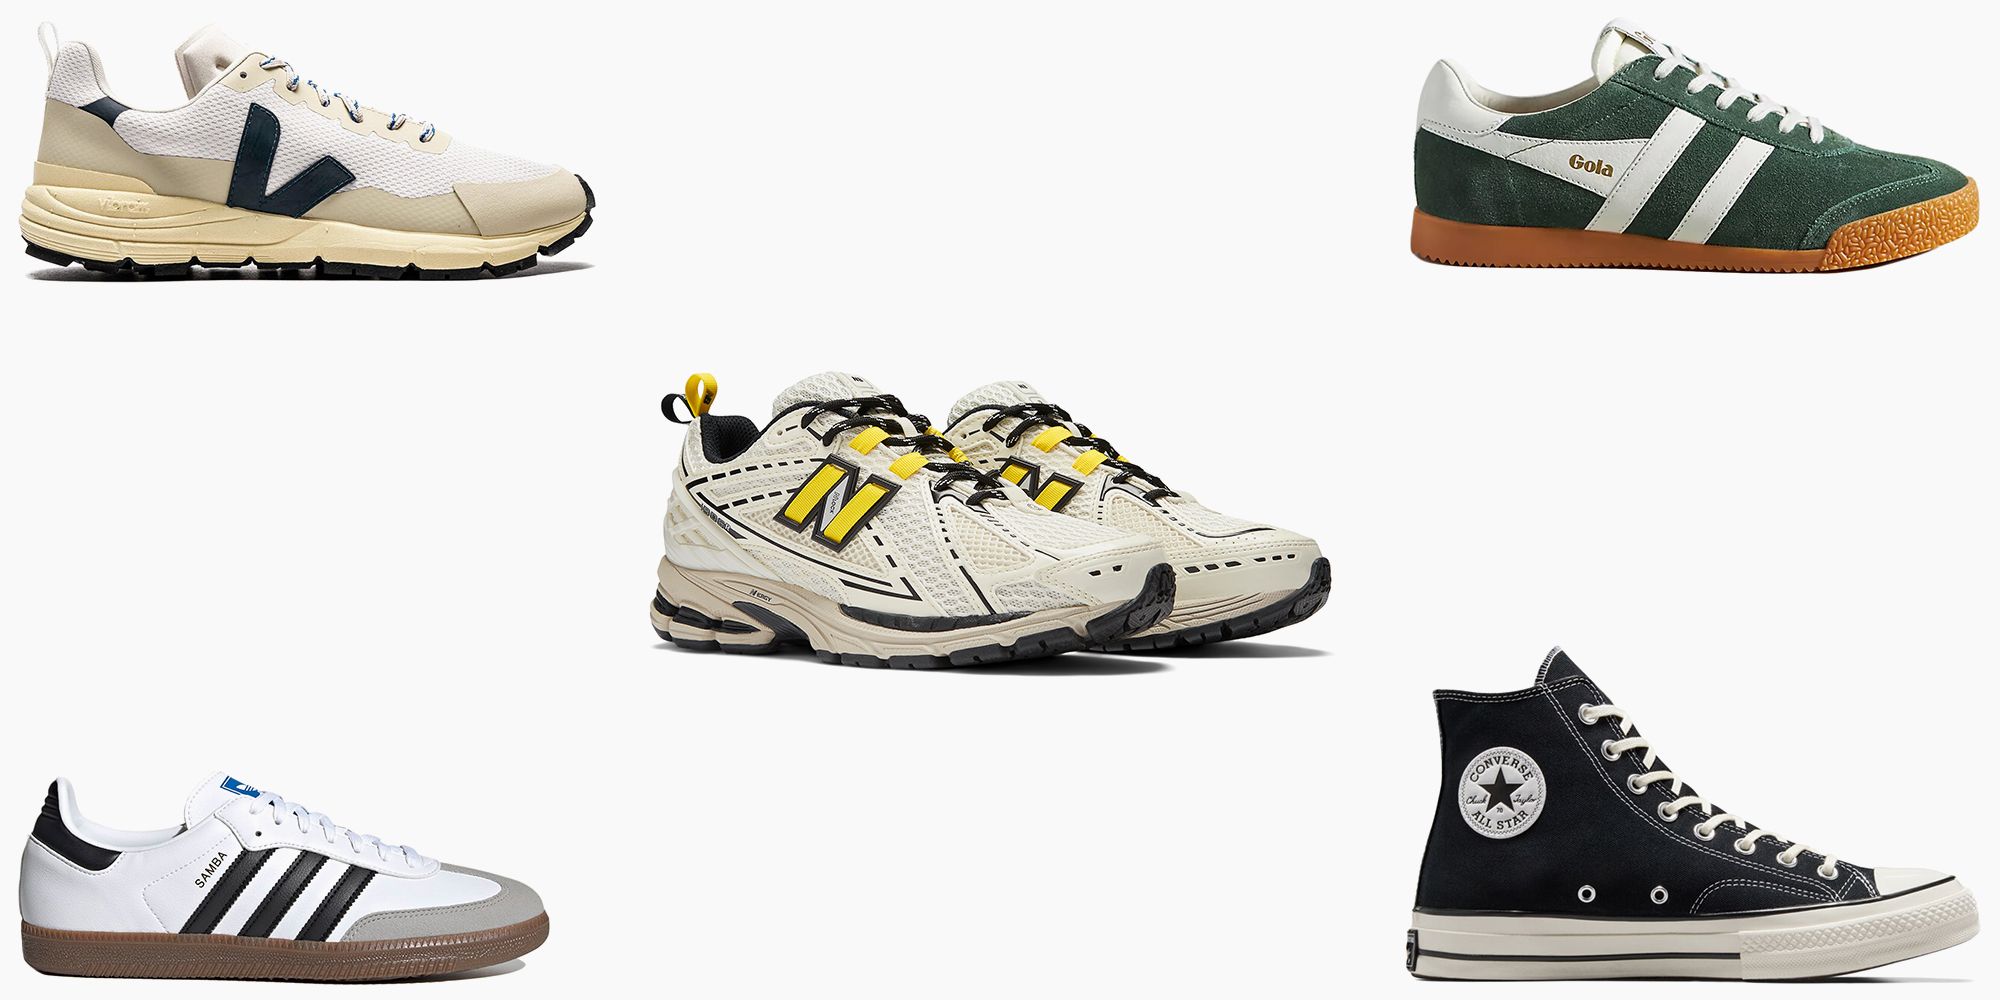 The Best Retro Sneakers for Women 2023: Stylish Retro Runners for Fall